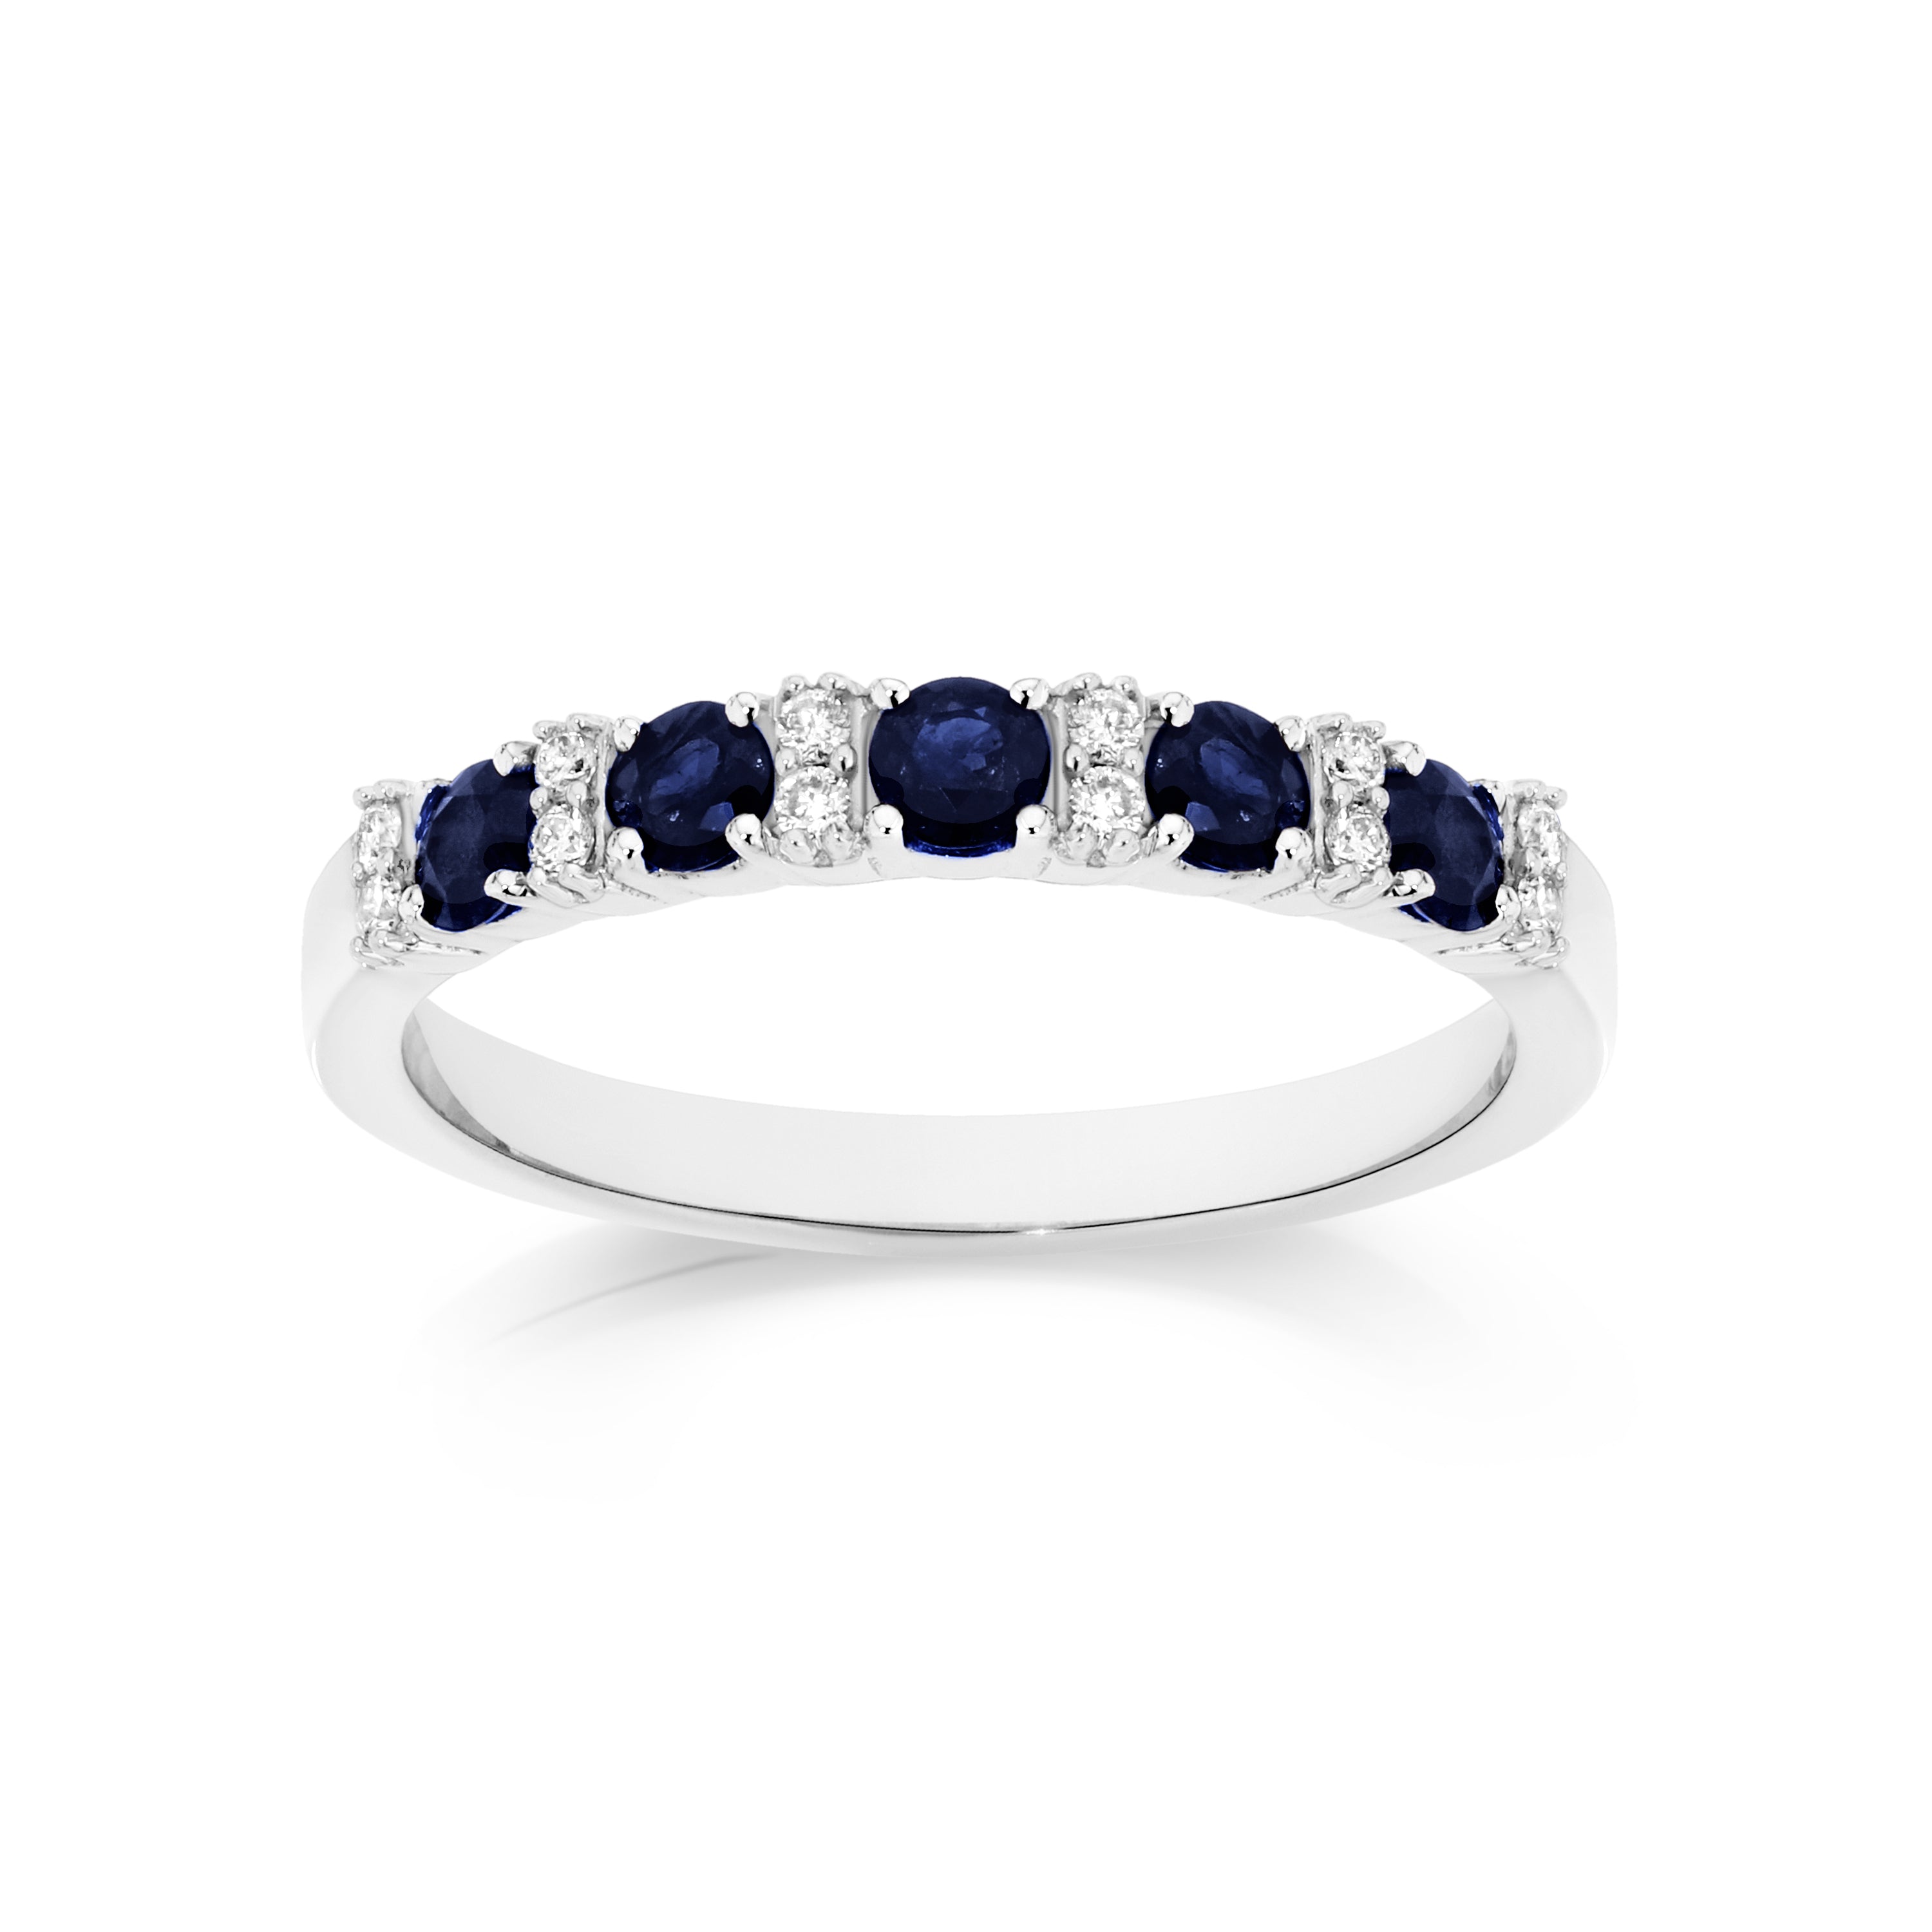 9ct white gold blue sapphire anniversary ring with 0.10ct of diamonds